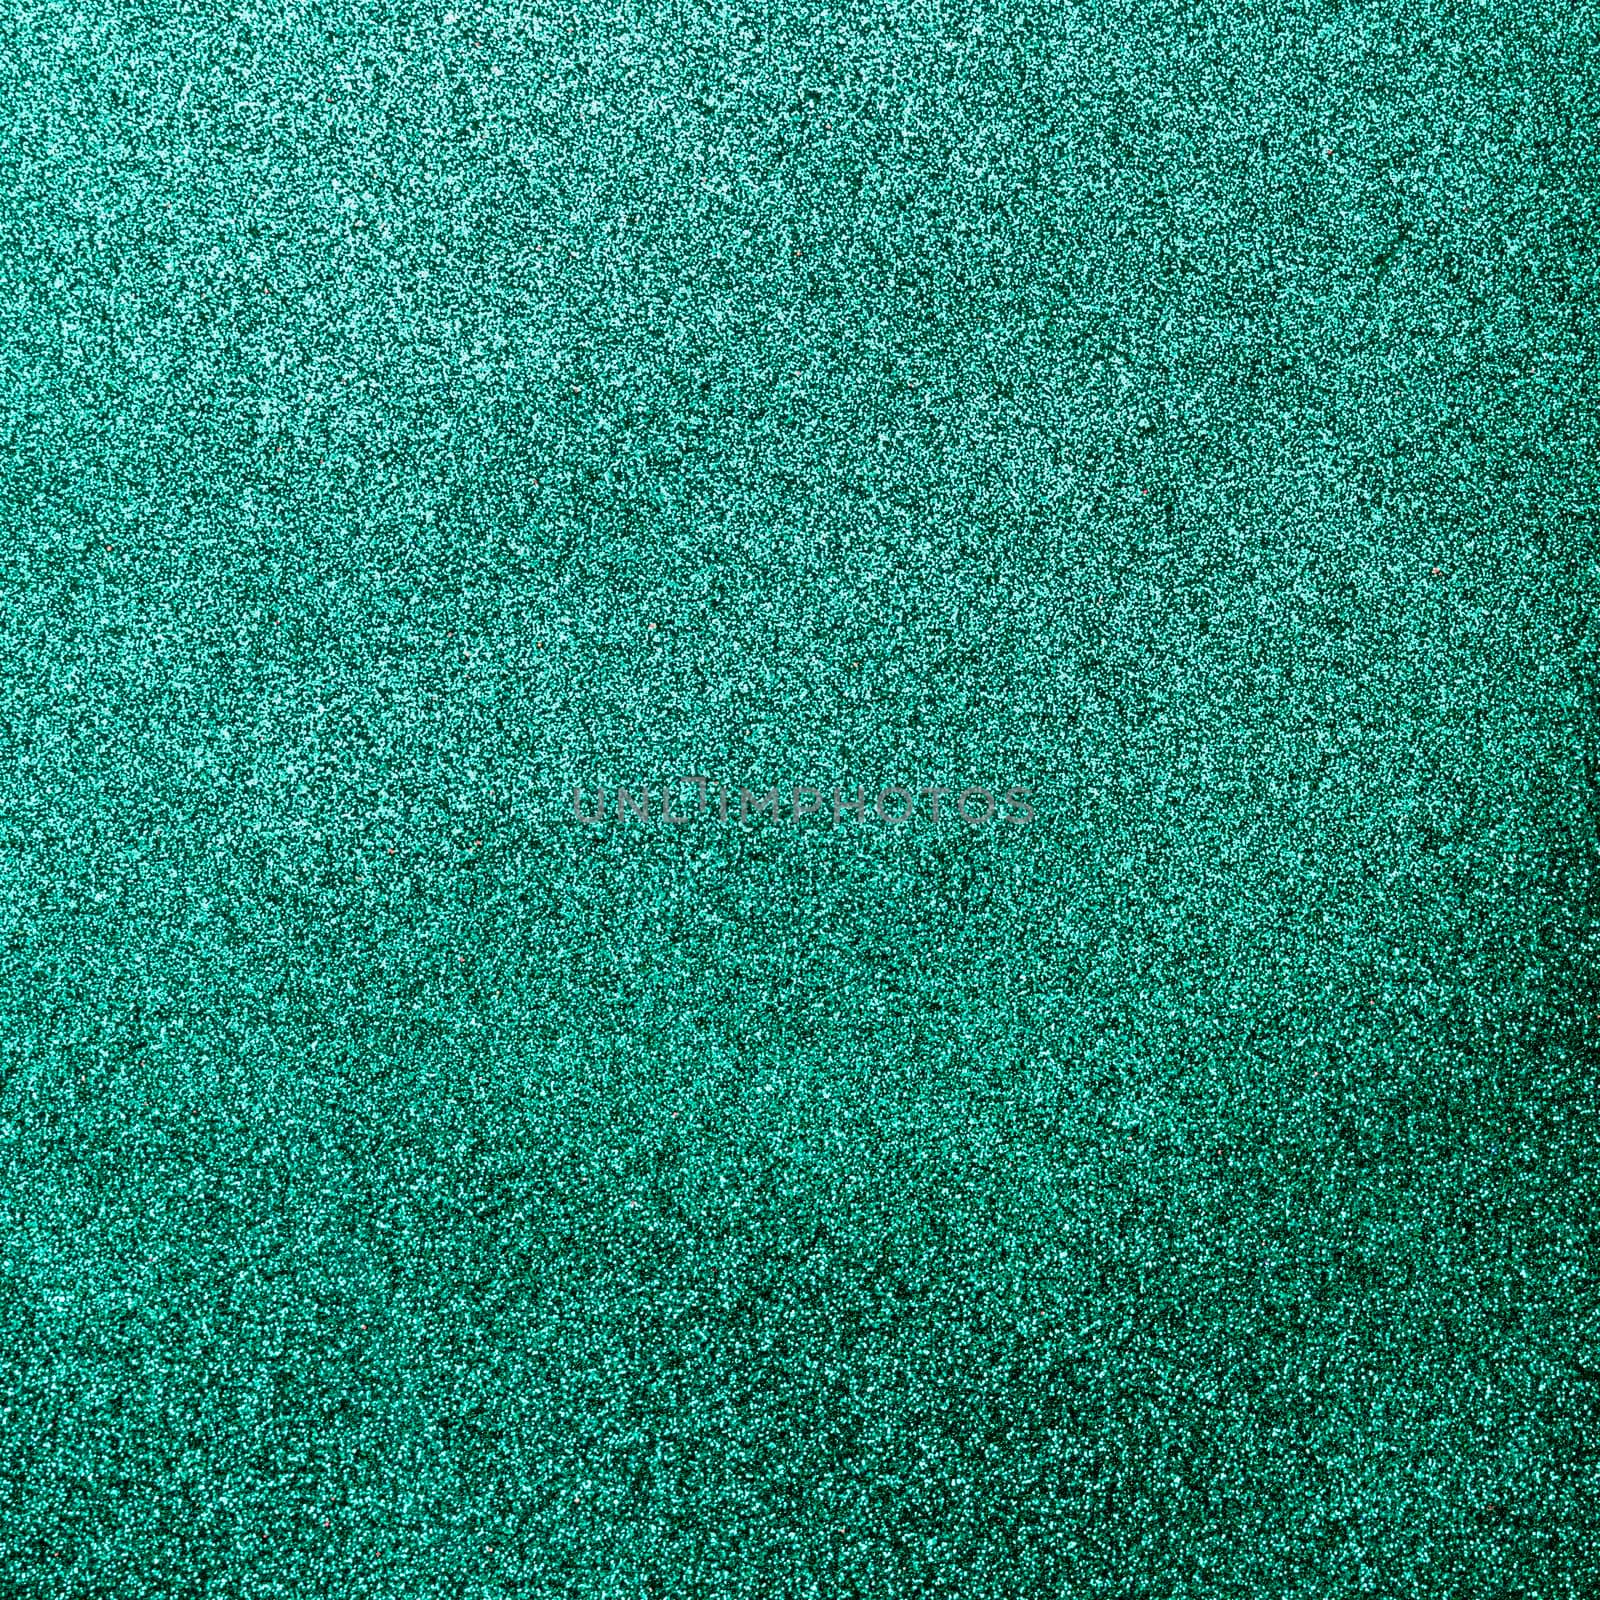 turquoise bedazzling glitter. High resolution photo